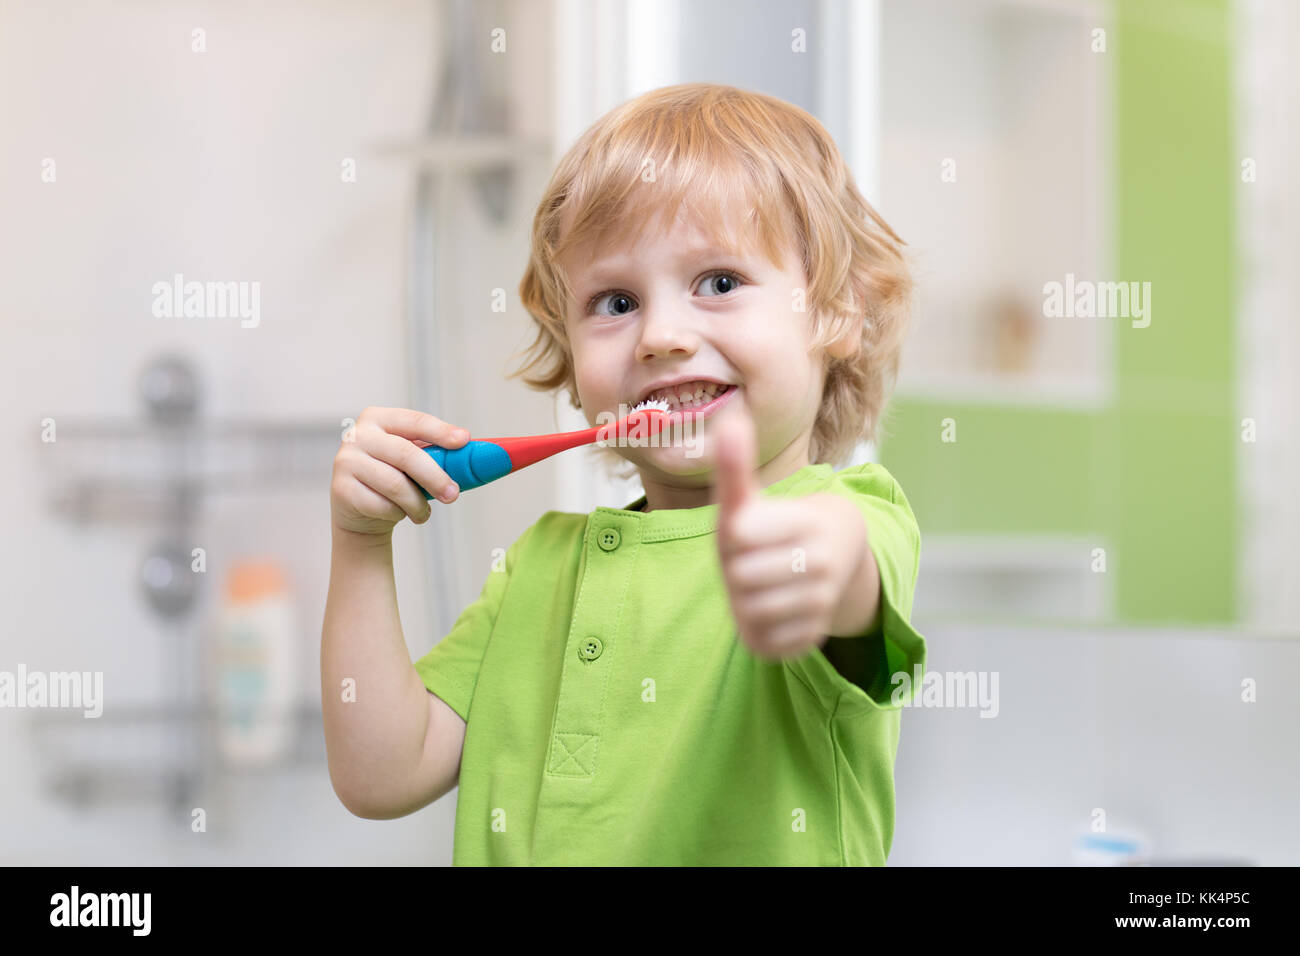 Little boy brushing his teeth in the bathroom. Smiling child holding toothbrush and showing thumbs up. Stock Photo